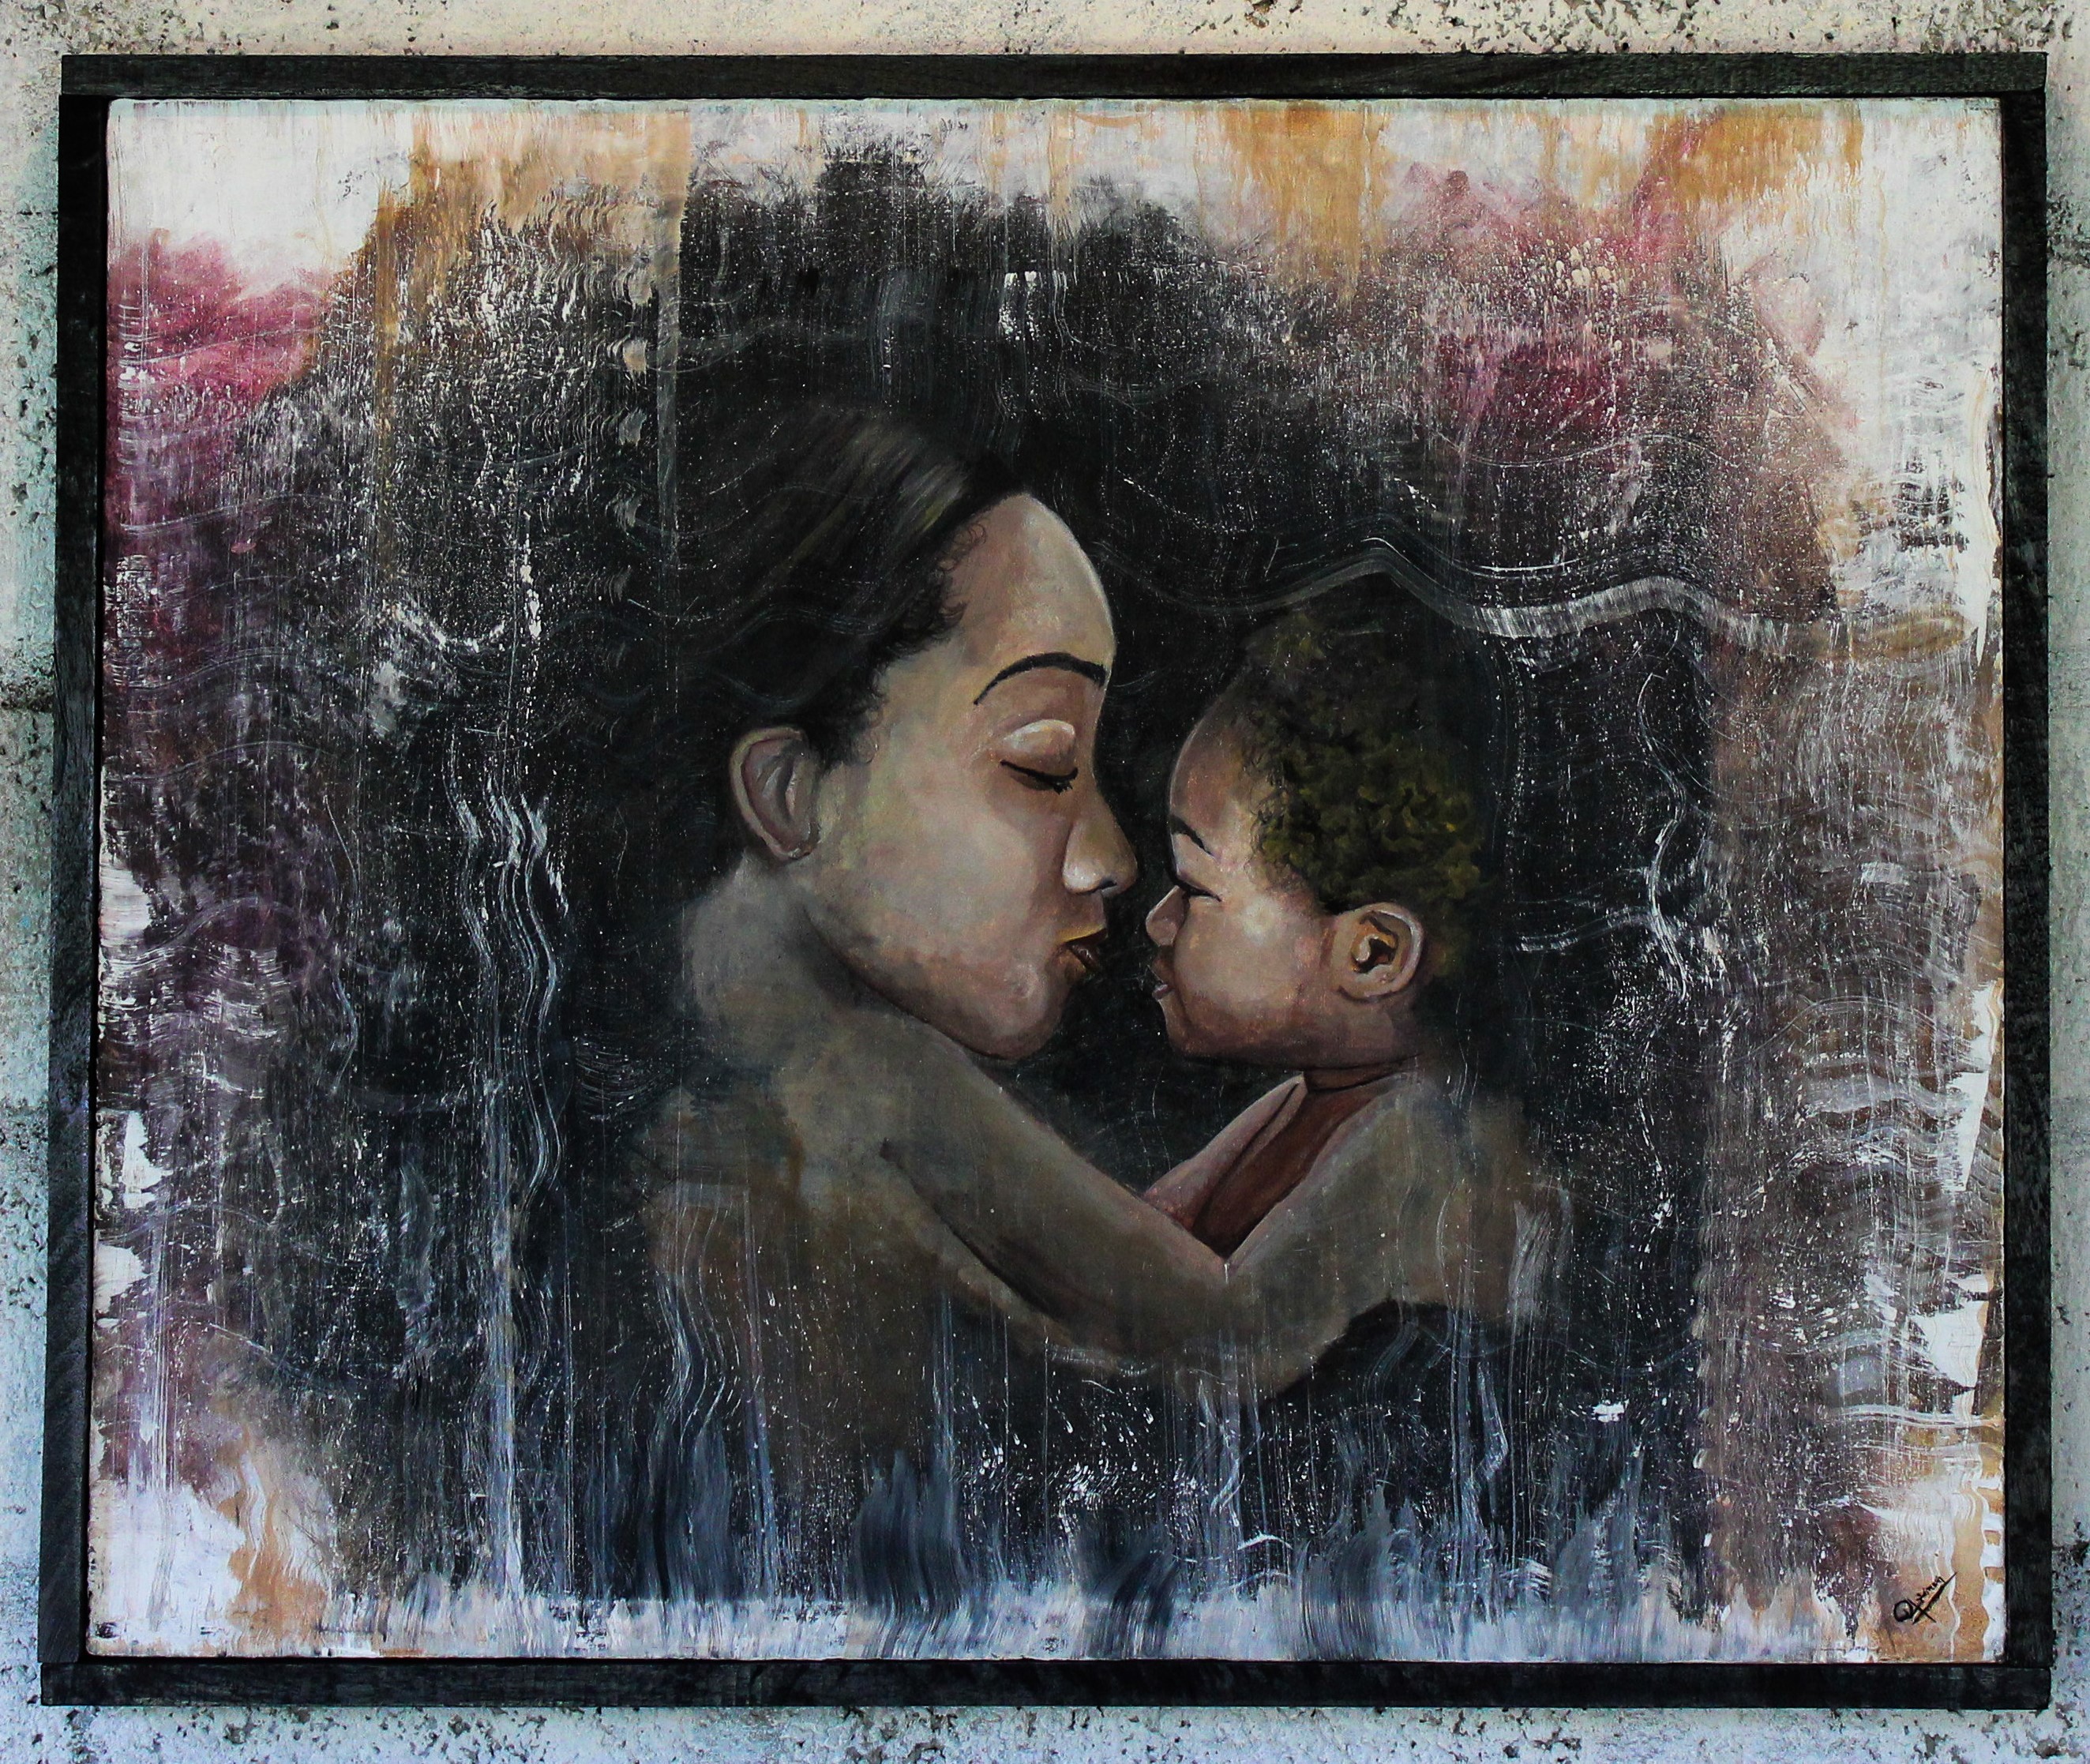 Mother 's Love by Anshula Attanayake